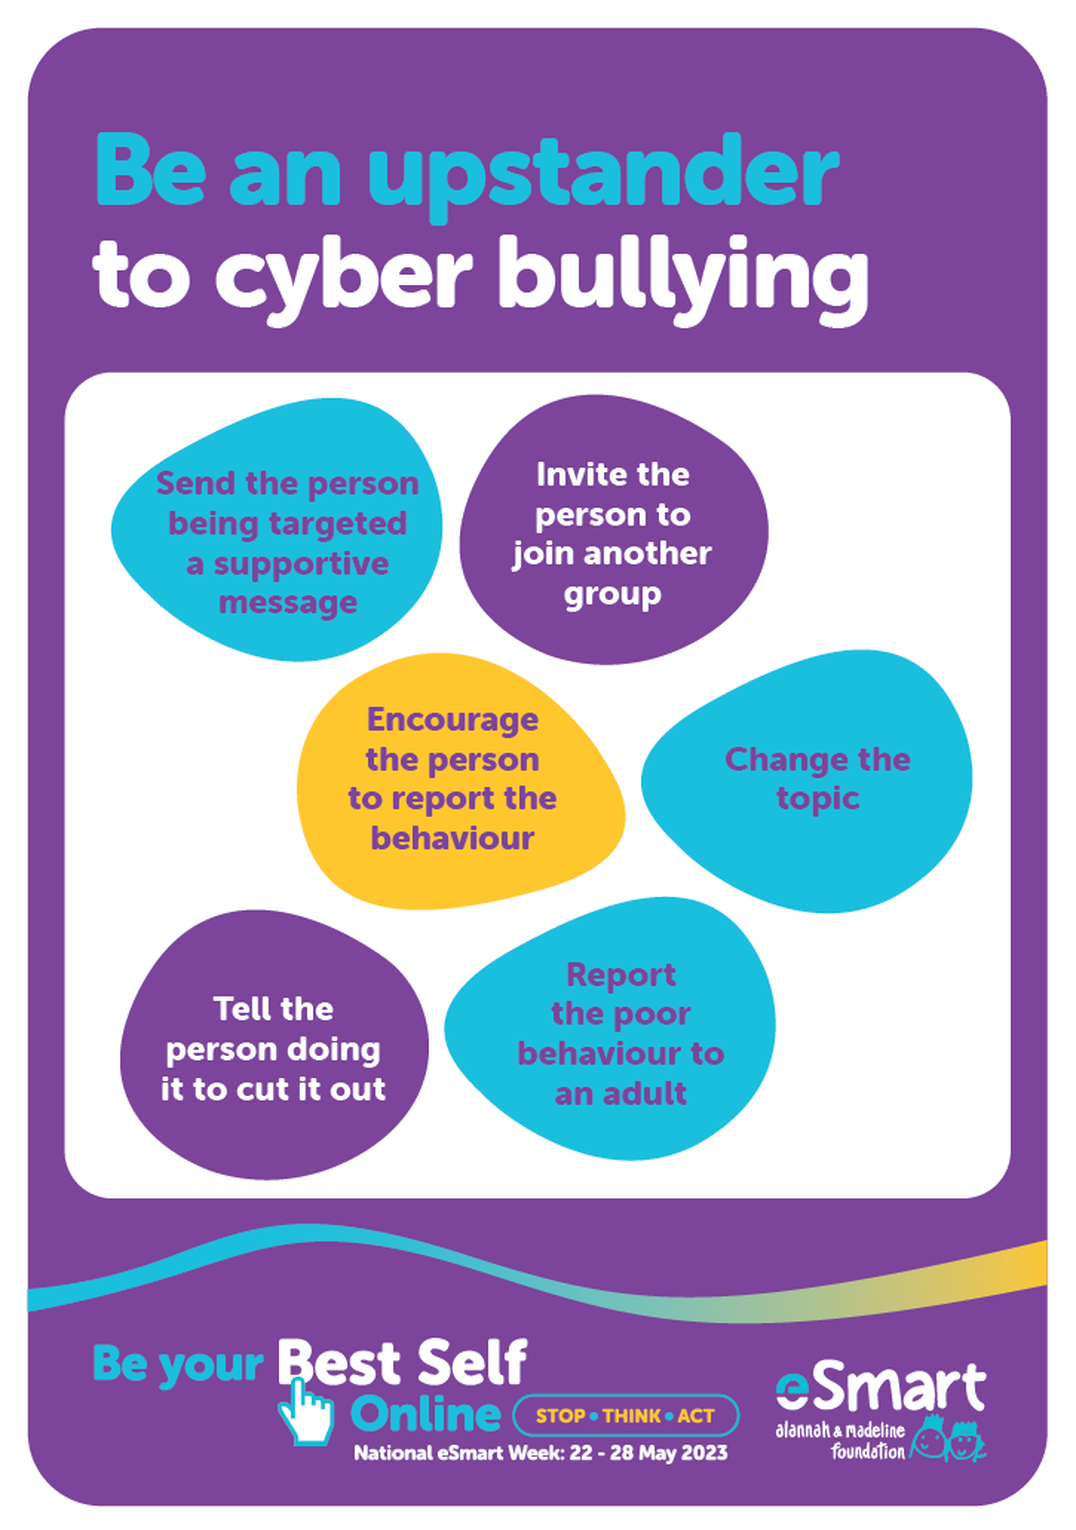 Be an upstander to cyber bullying